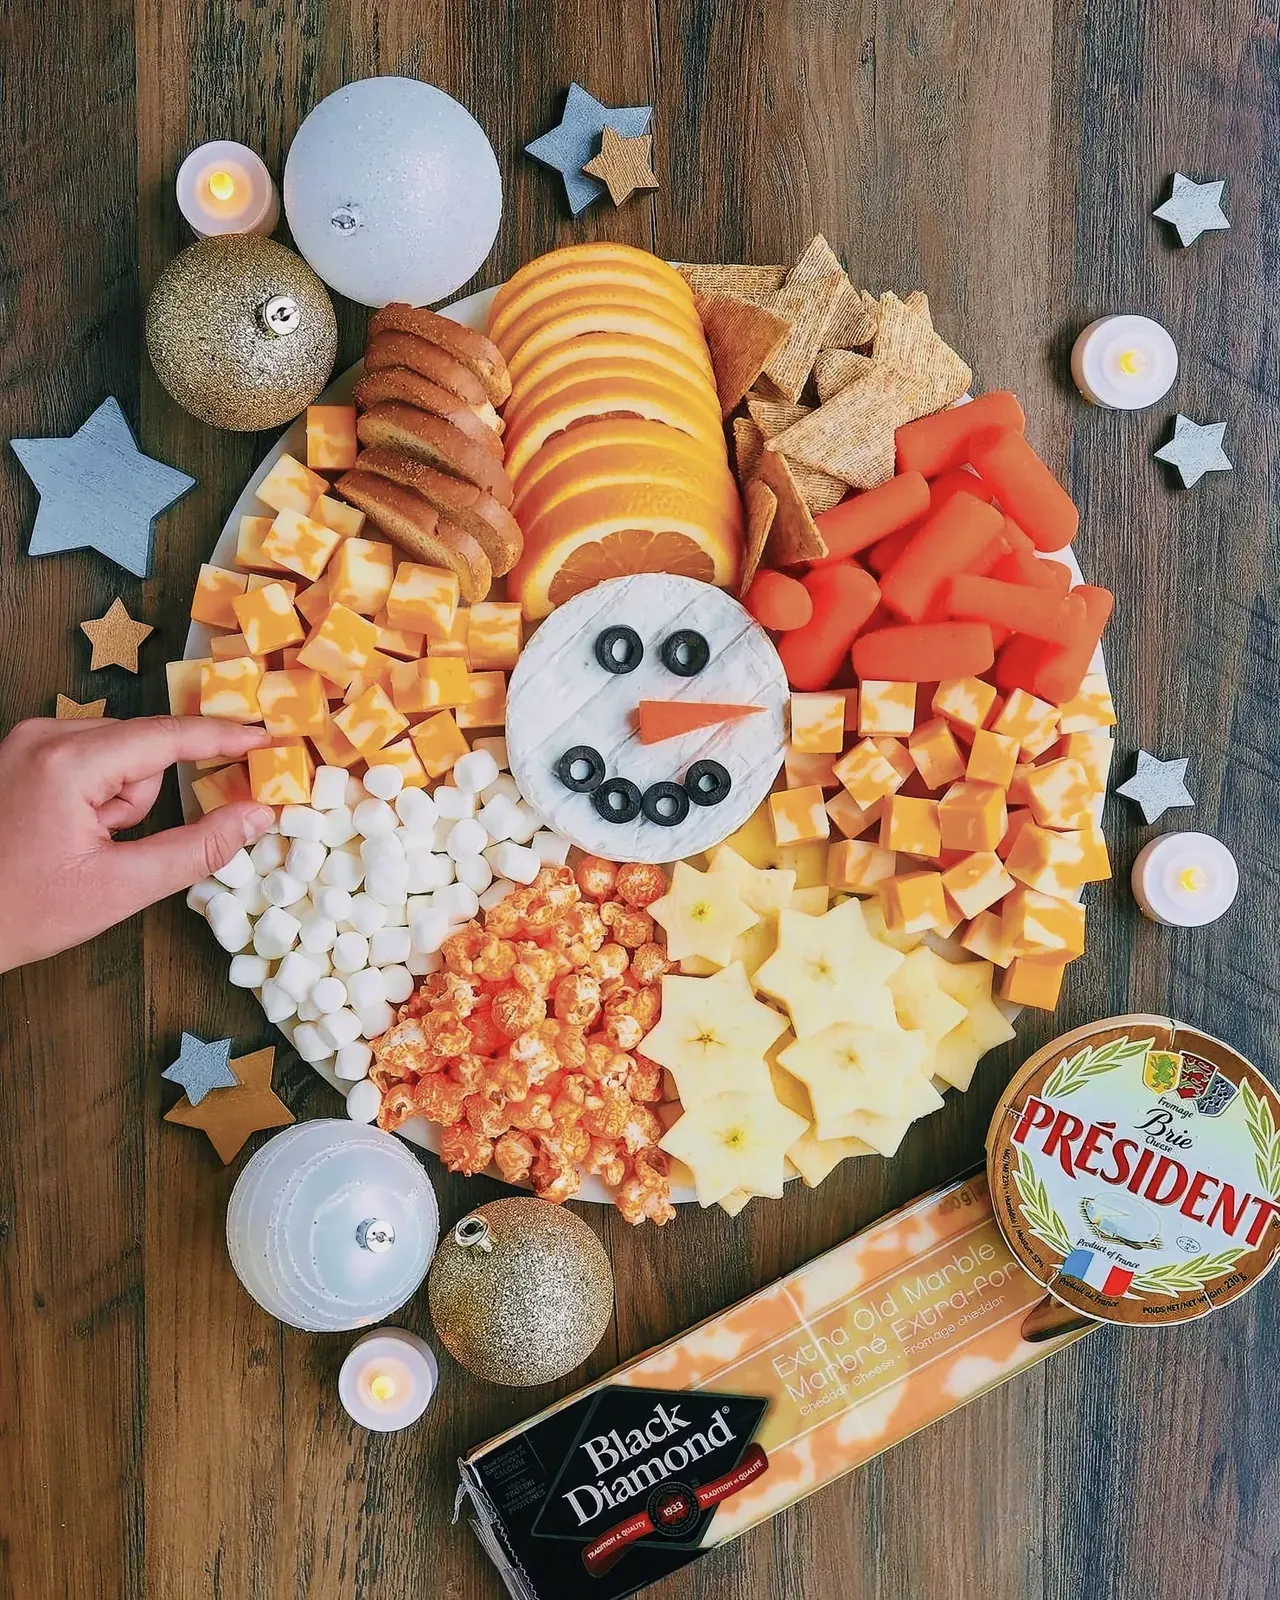 Delightful snowman-themed grazing platter with vegetables, cheese, and snacks